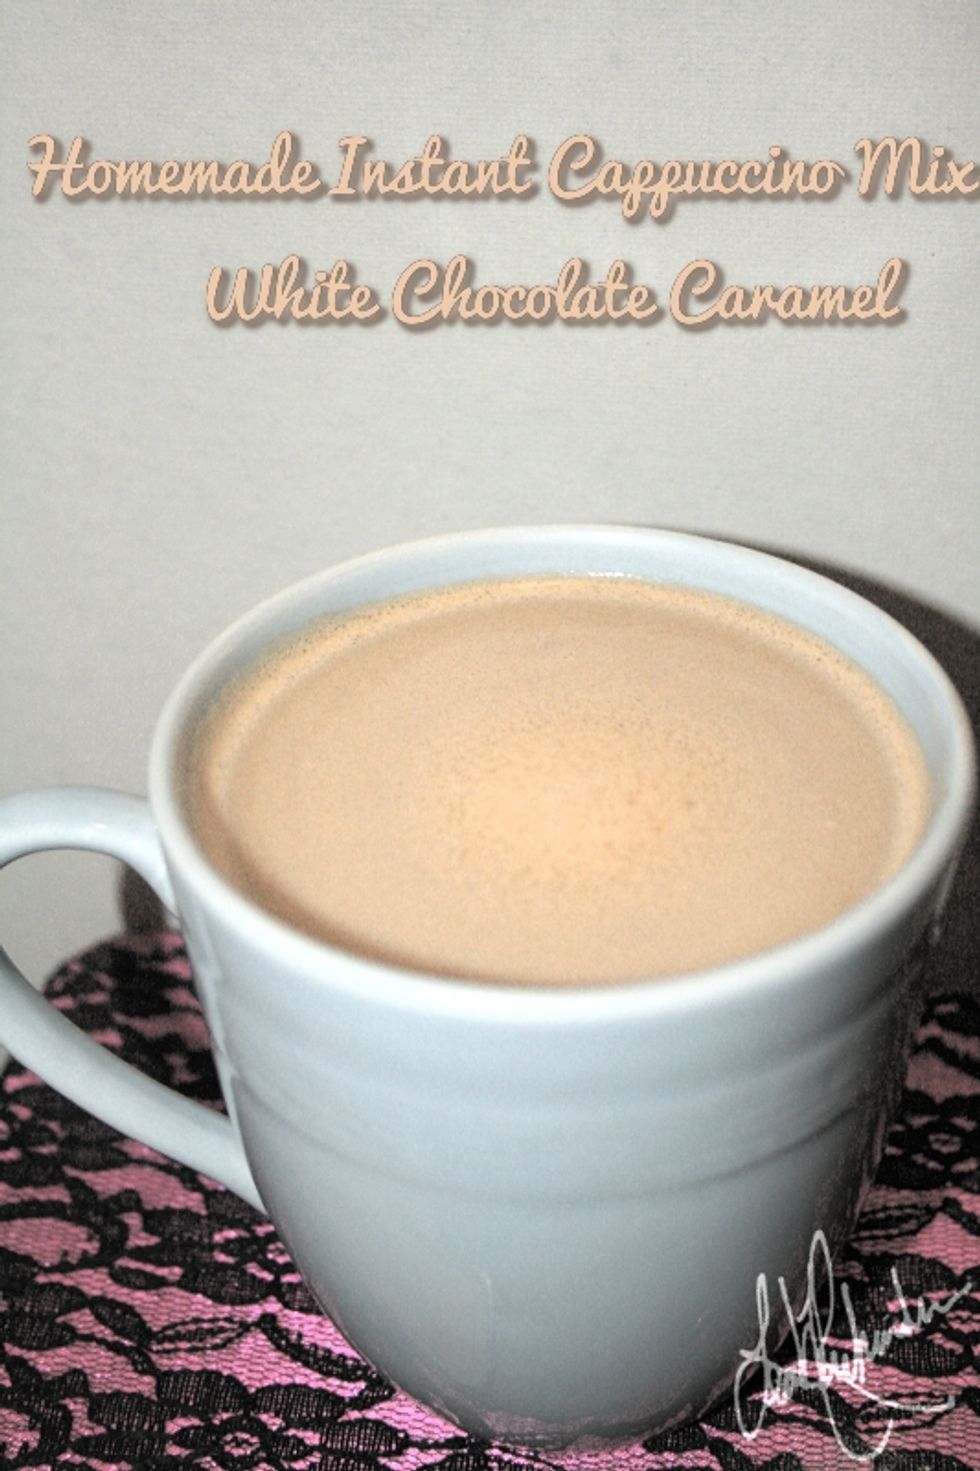 Homemade Instant Cappuccino Mix White Chocolate Caramel